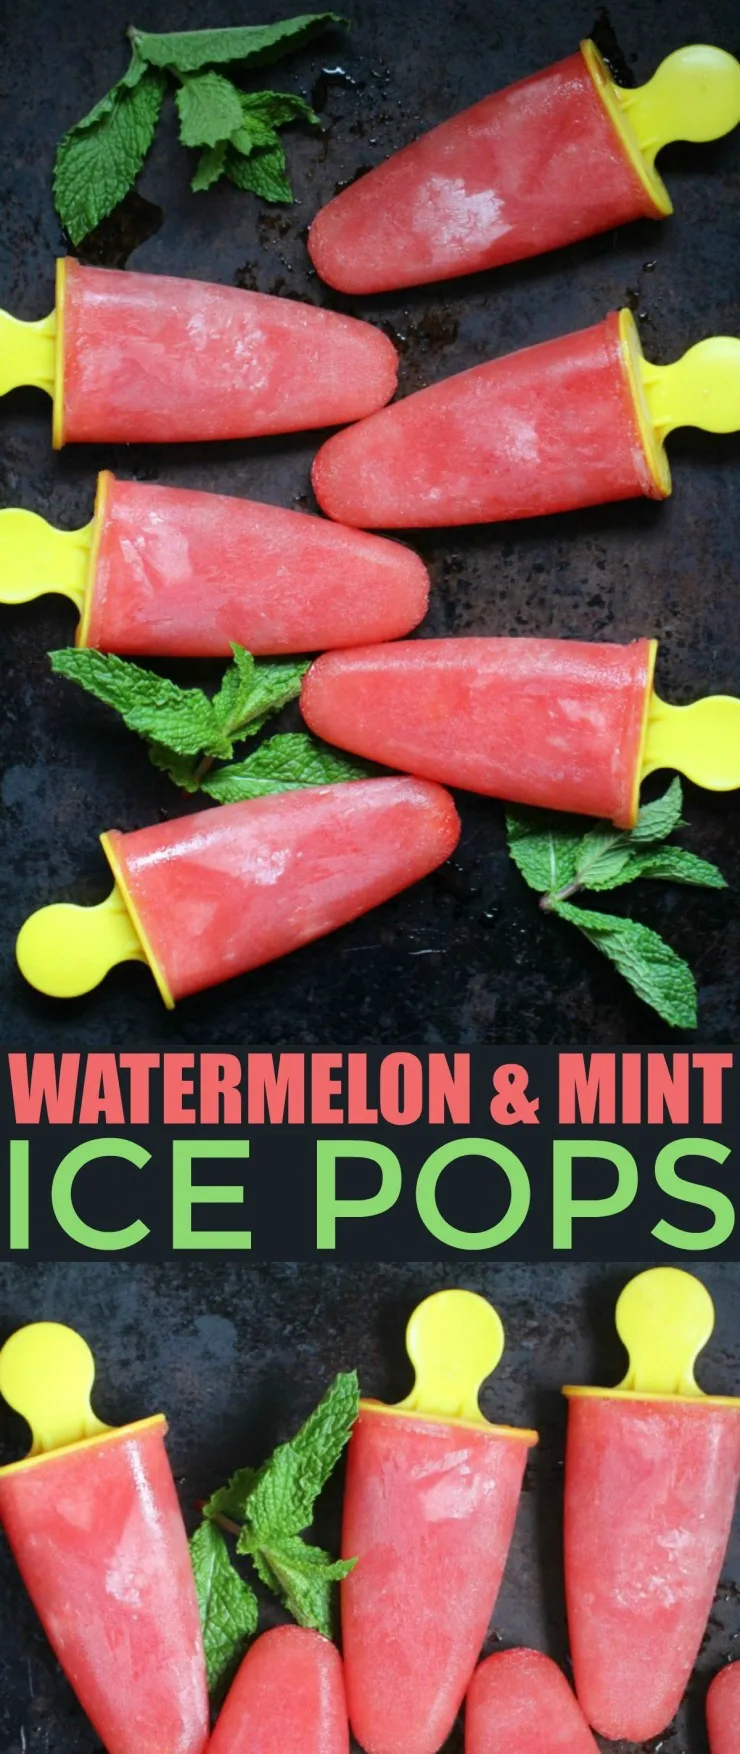 These Watermelon & Mint Ice Pops are quite possibly one of the most refreshing summer treats you can easily make at home yourself!